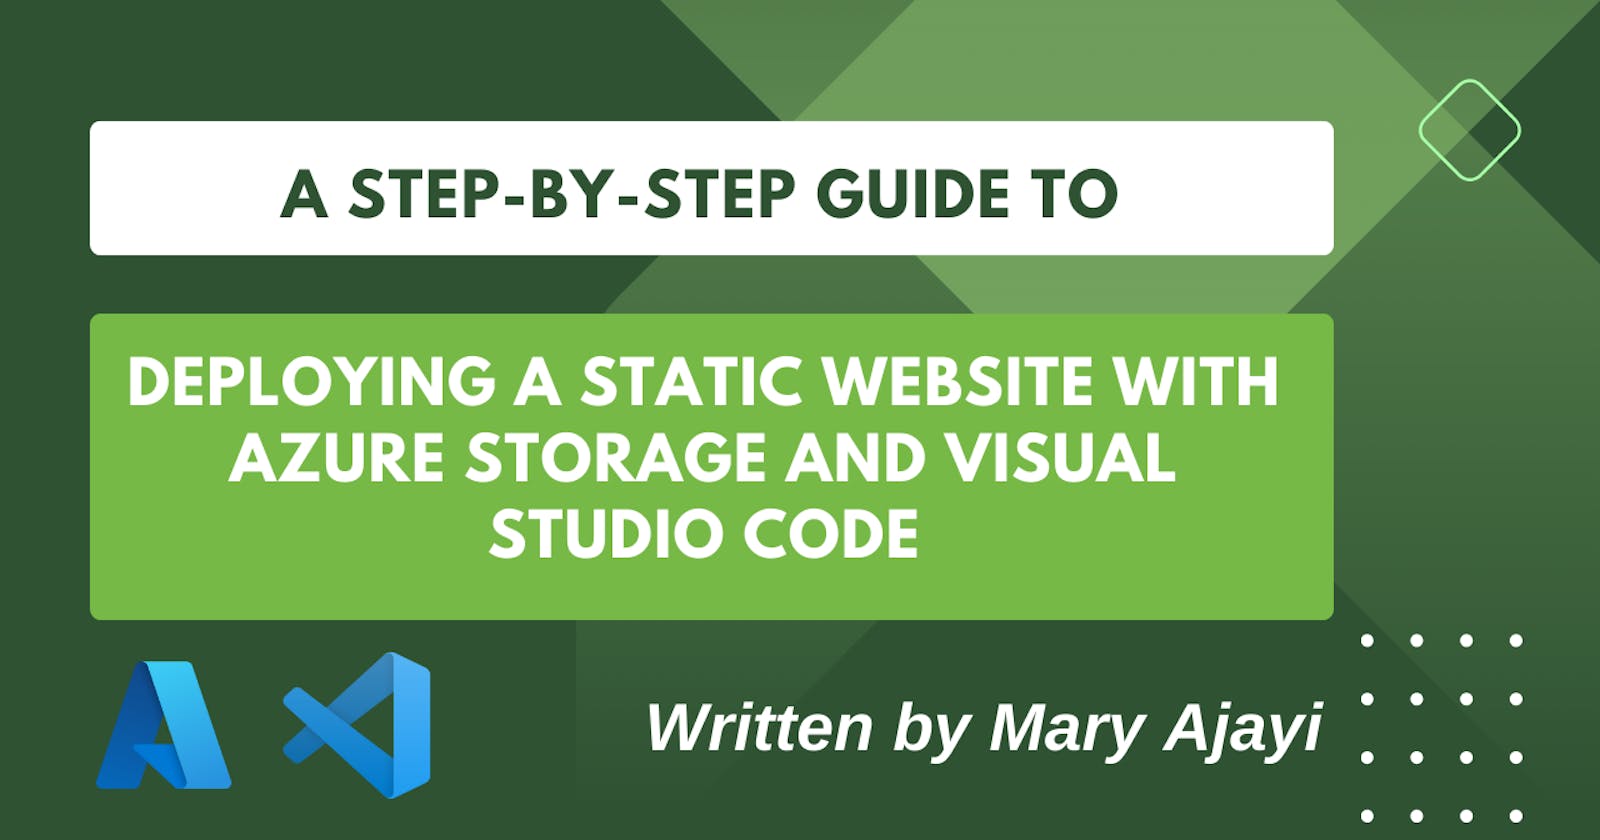 A Step-by-Step Guide to Deploying a Static Website with Azure Storage and Visual Studio Code